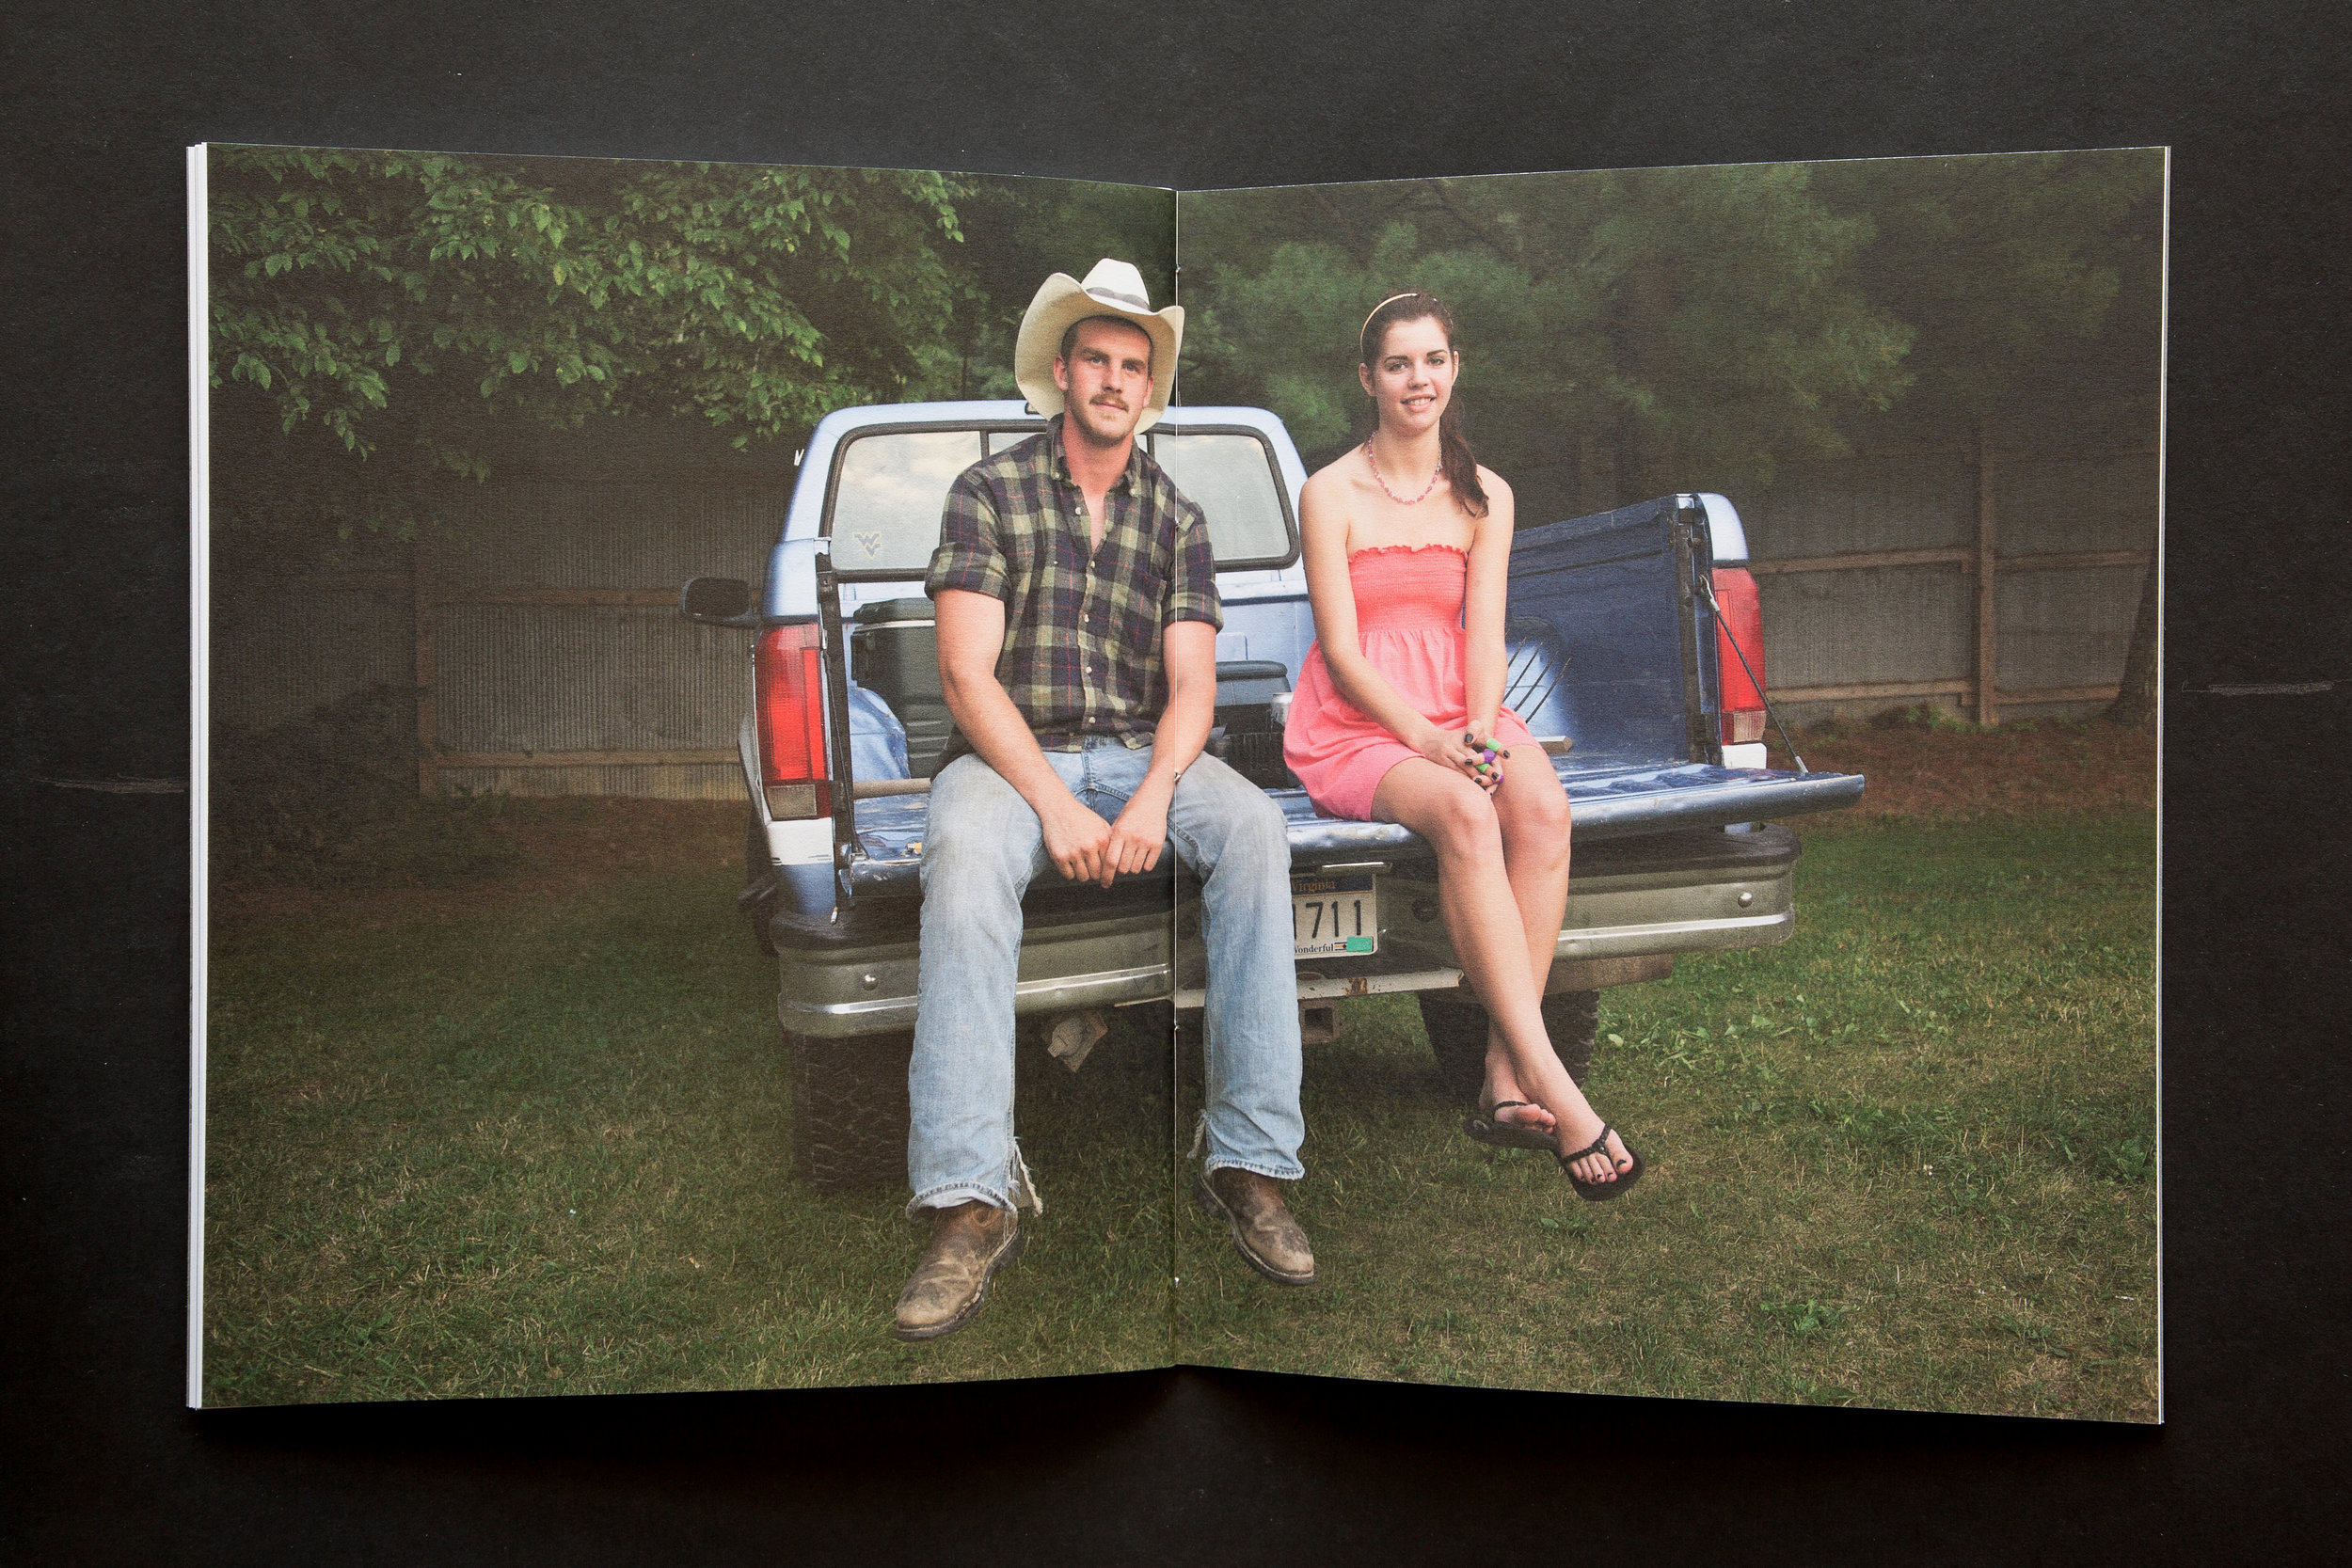  The photograph of Cody and Emily ends the image narrative. 